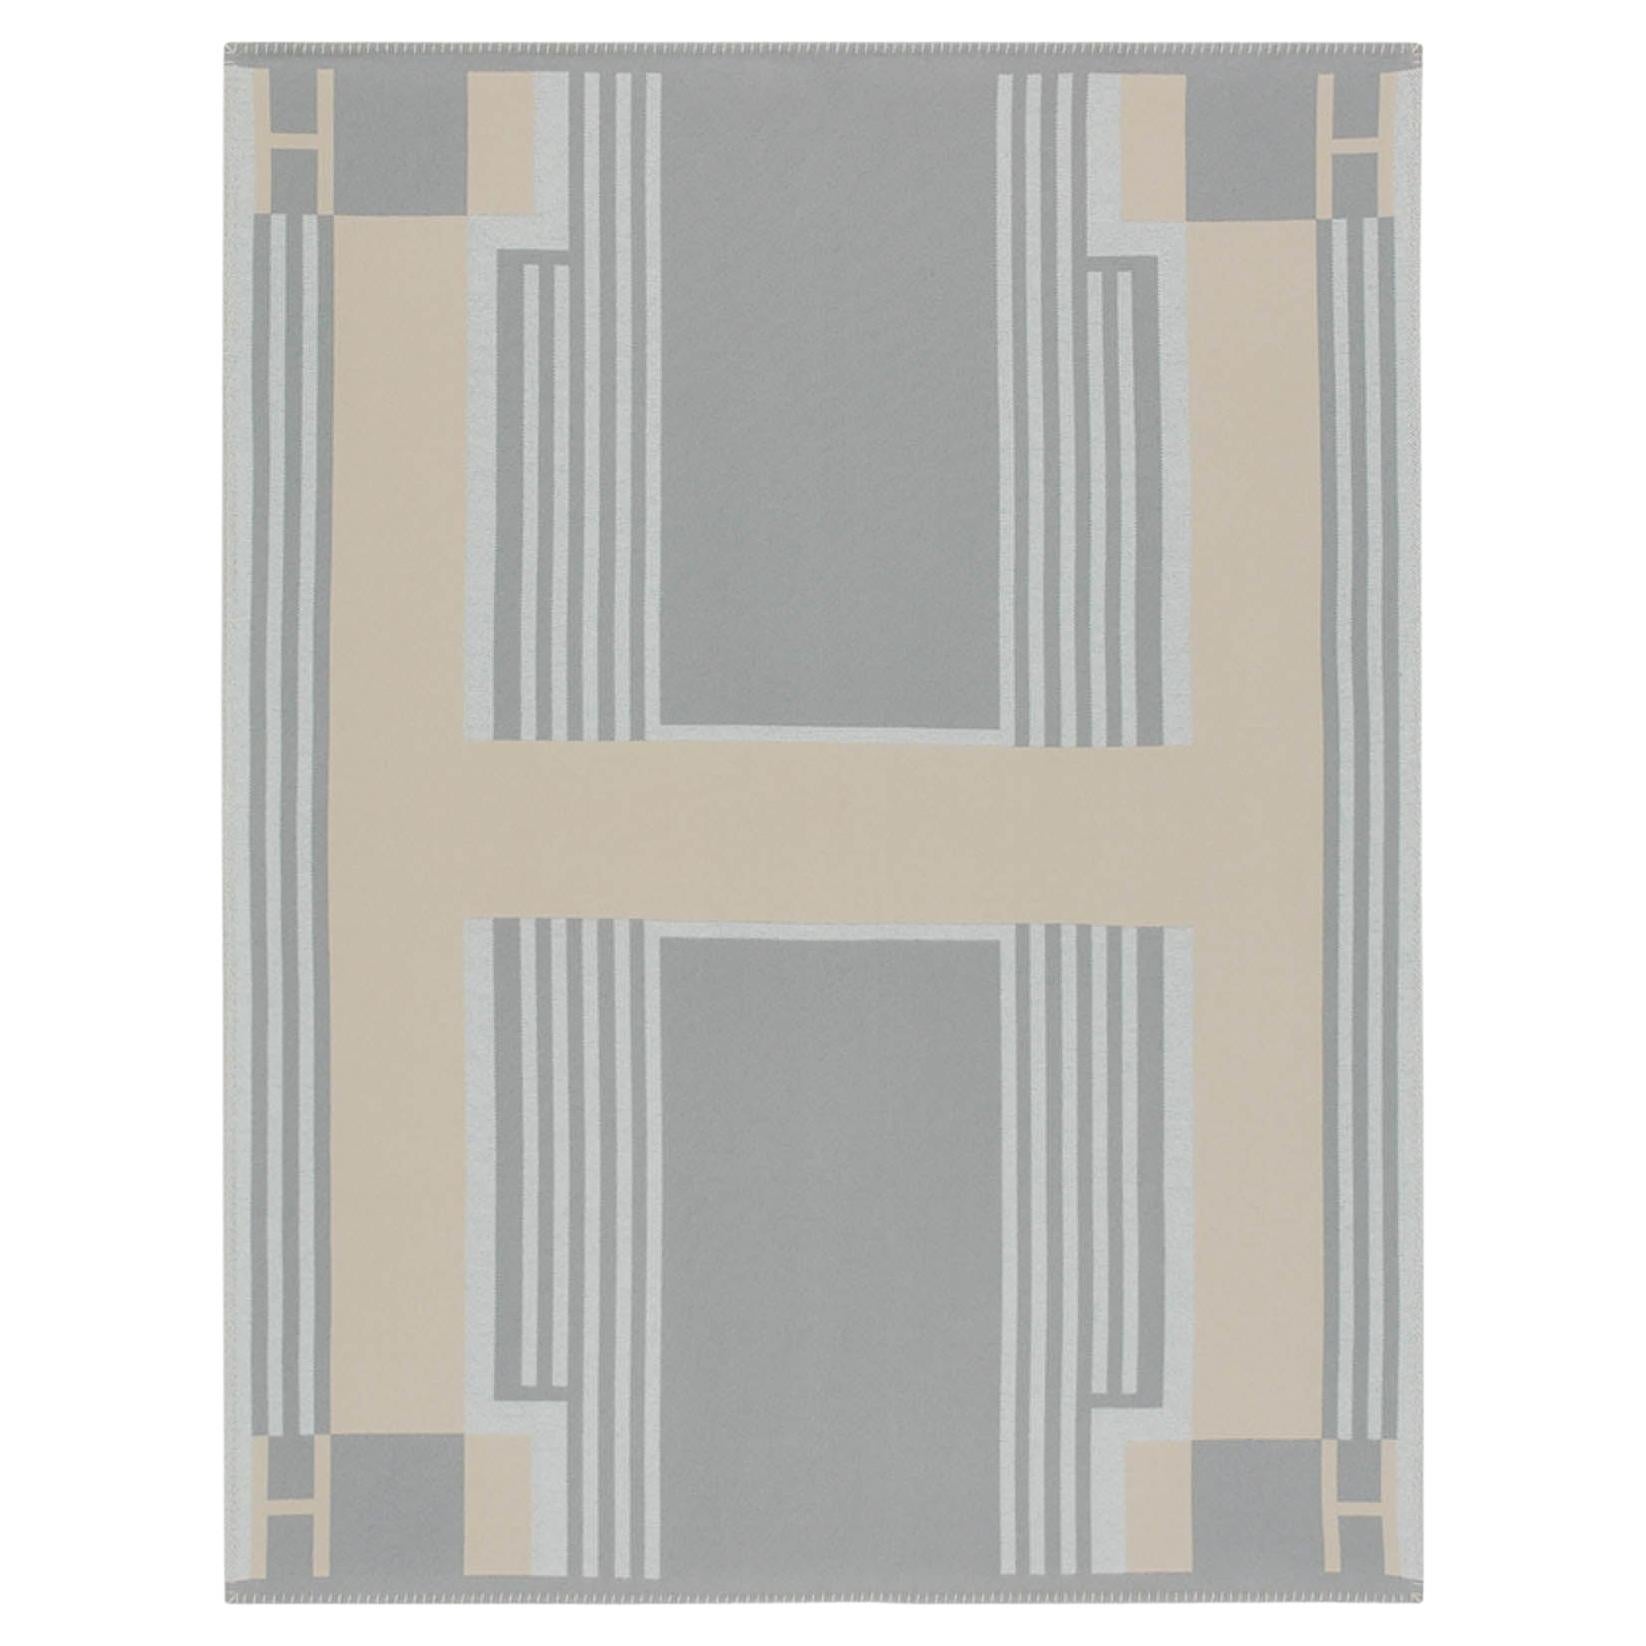 Hermes Ithaque Blanket Gris Perle Wool and Cashmere For Sale